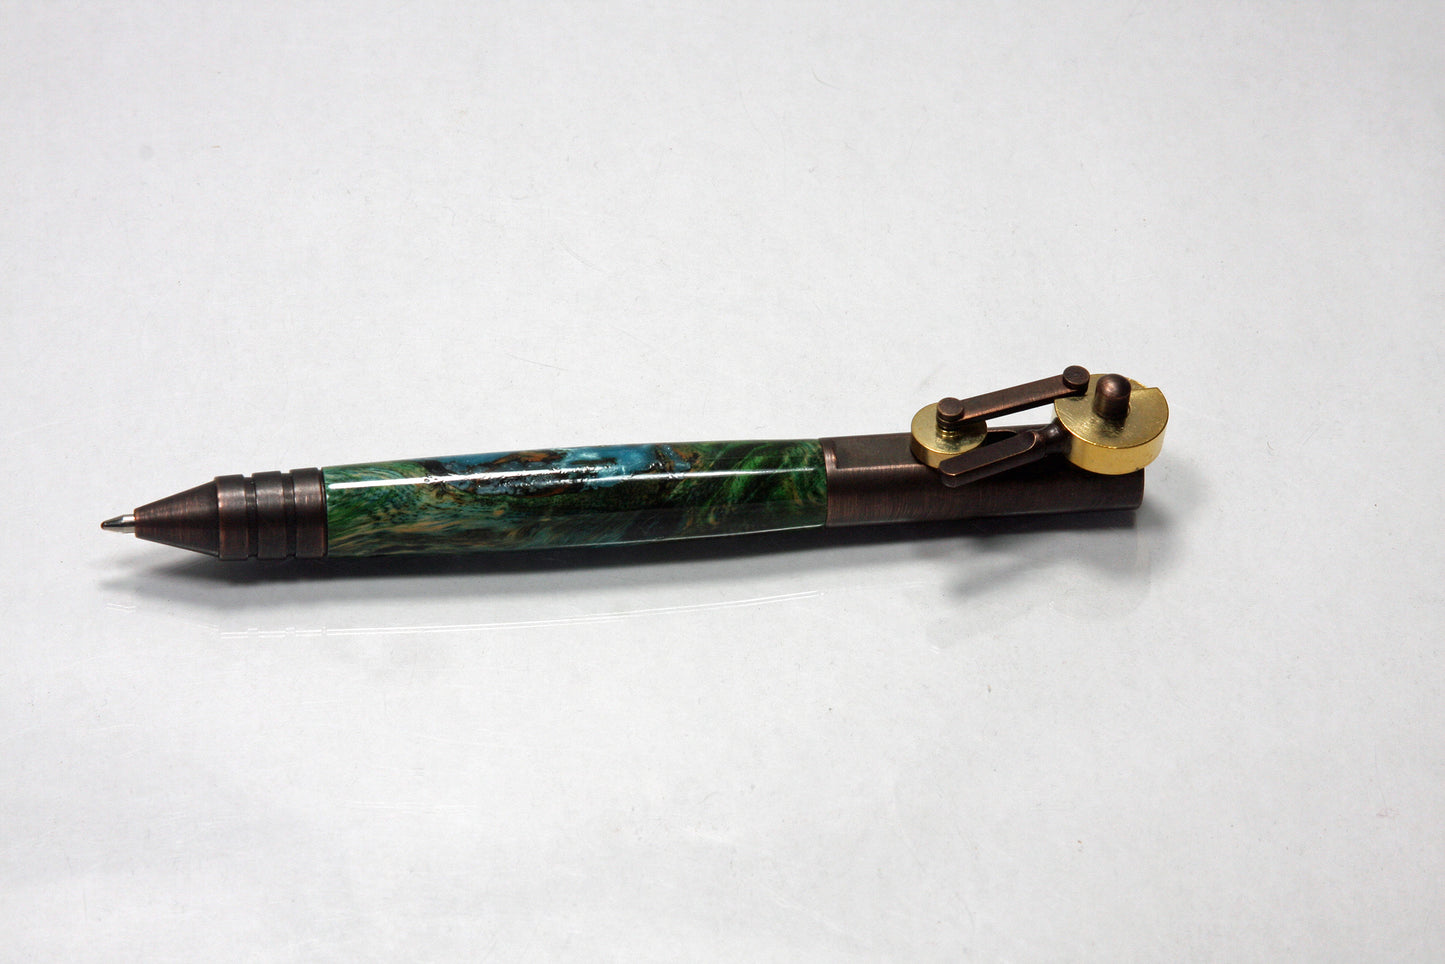 Steampunk Piston Ballpoint Pen with Clever Gear Action and Cottonwood Burl Body